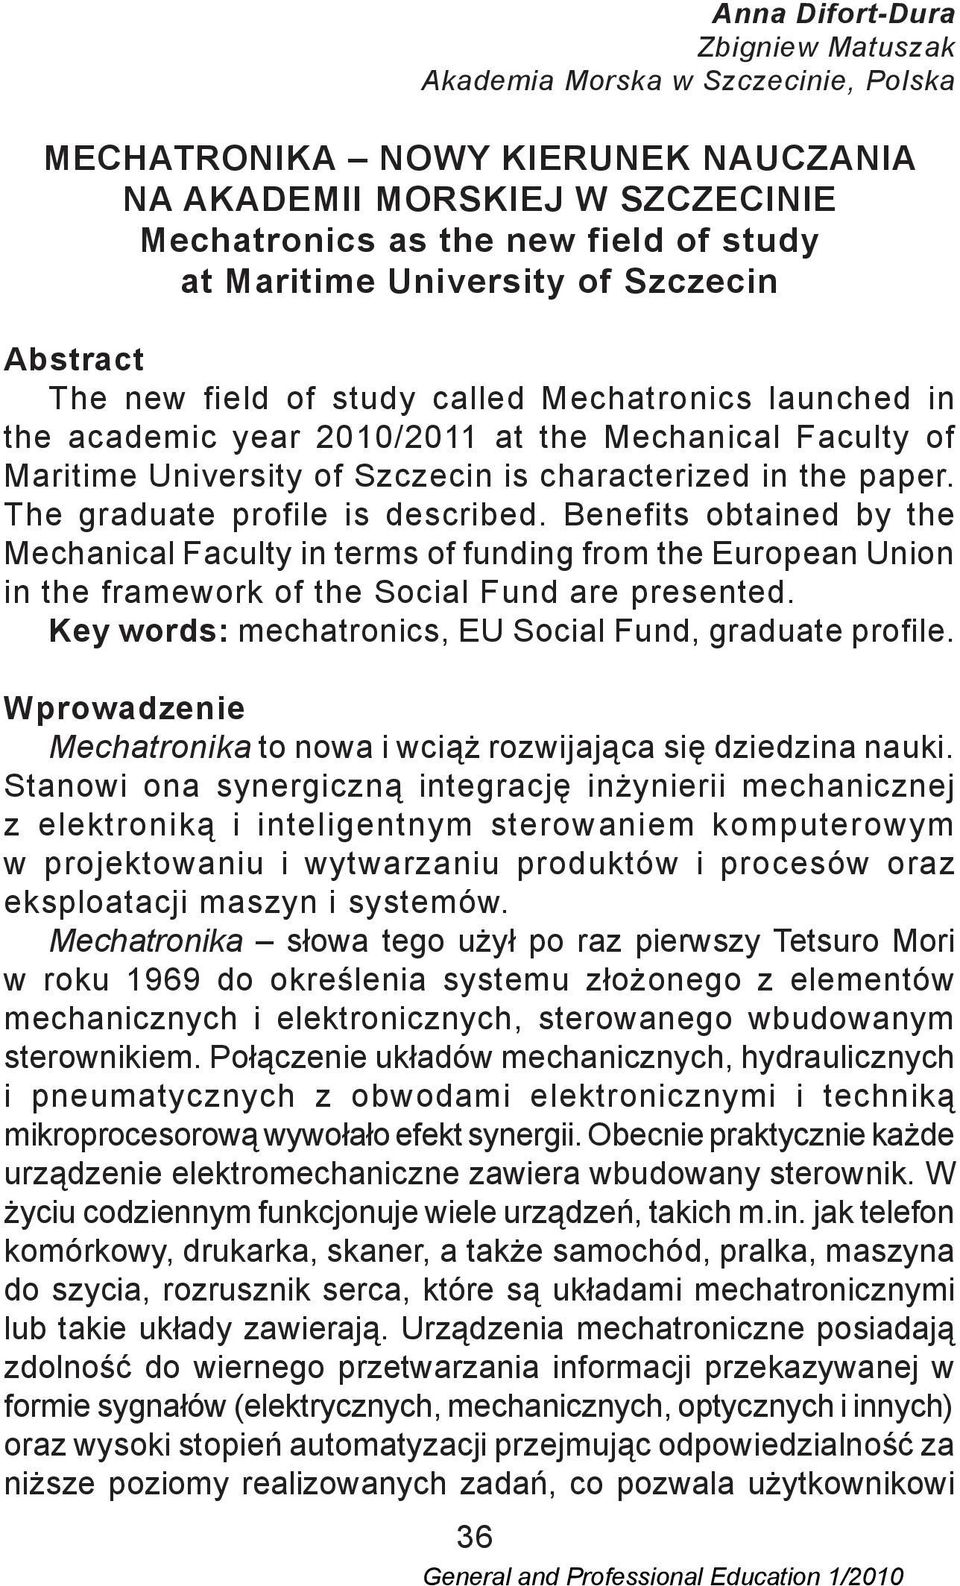 paper. The graduate profile is described. Benefits obtained by the Mechanical Faculty in terms of funding from the European Union in the framework of the Social Fund are presented.